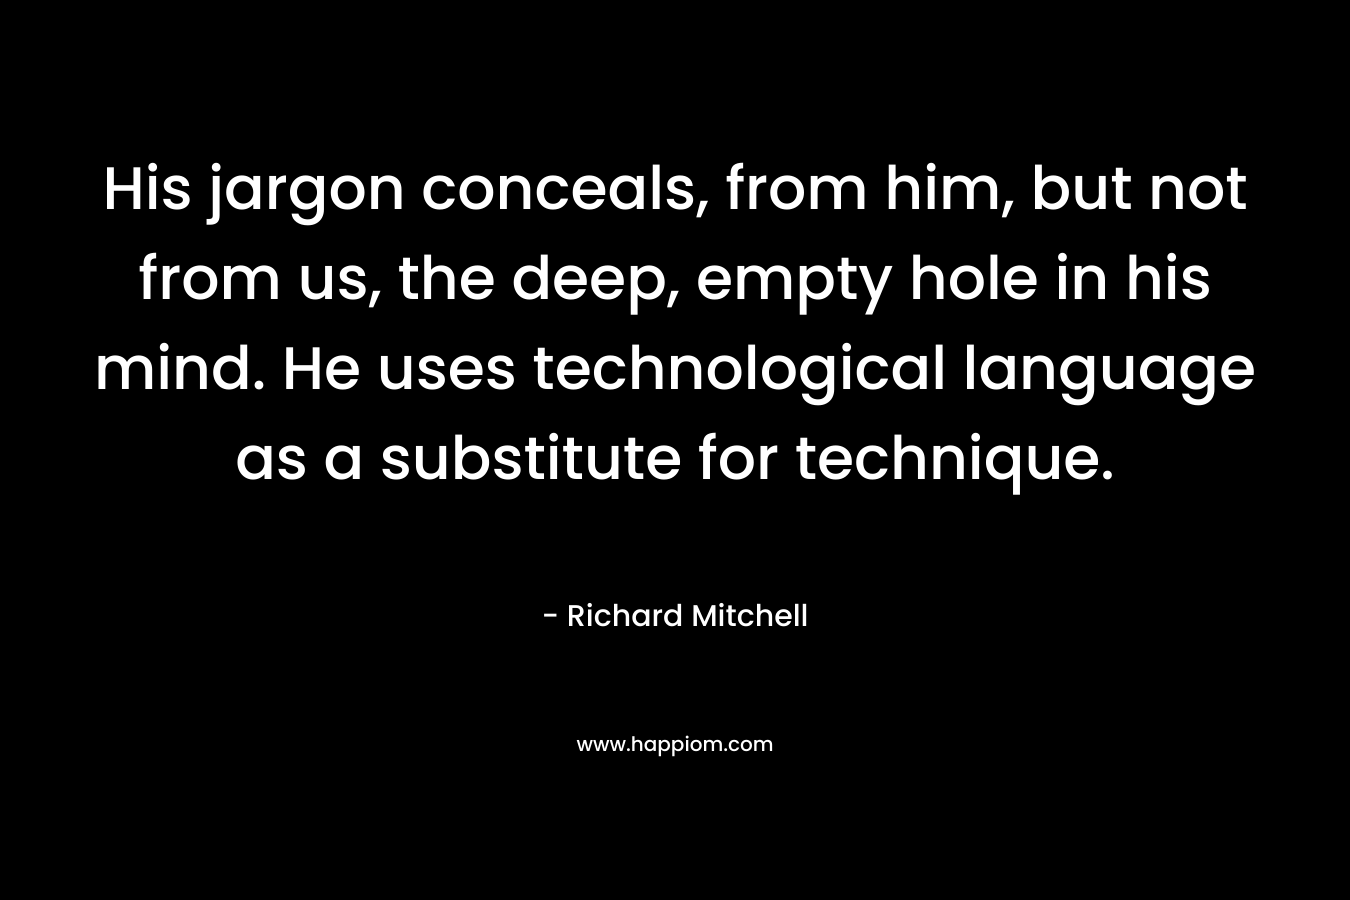 His jargon conceals, from him, but not from us, the deep, empty hole in his mind. He uses technological language as a substitute for technique. – Richard Mitchell